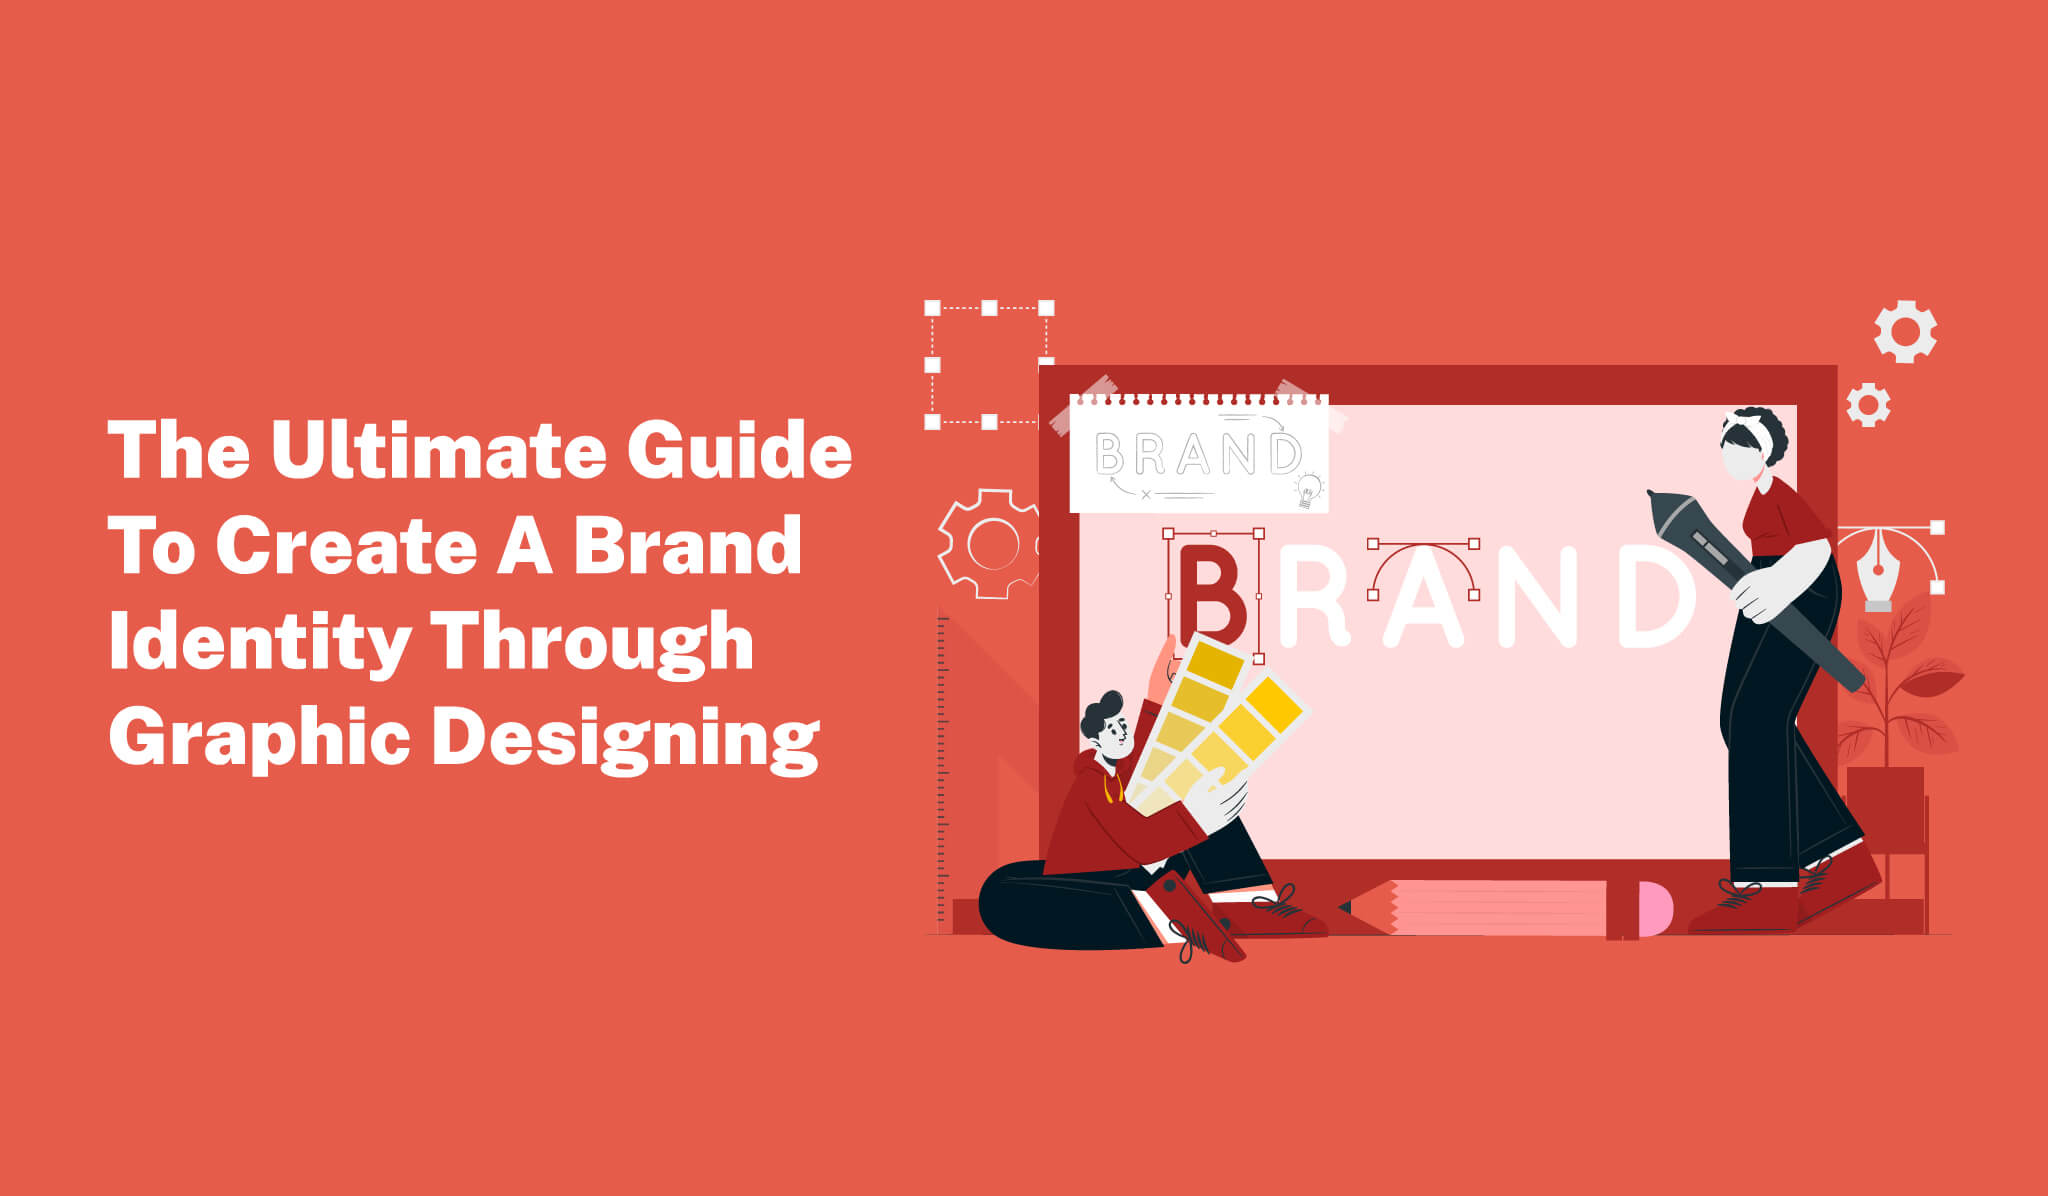 The Ultimate Guide To Create A Brand Identity Through Graphic Designing - Postive